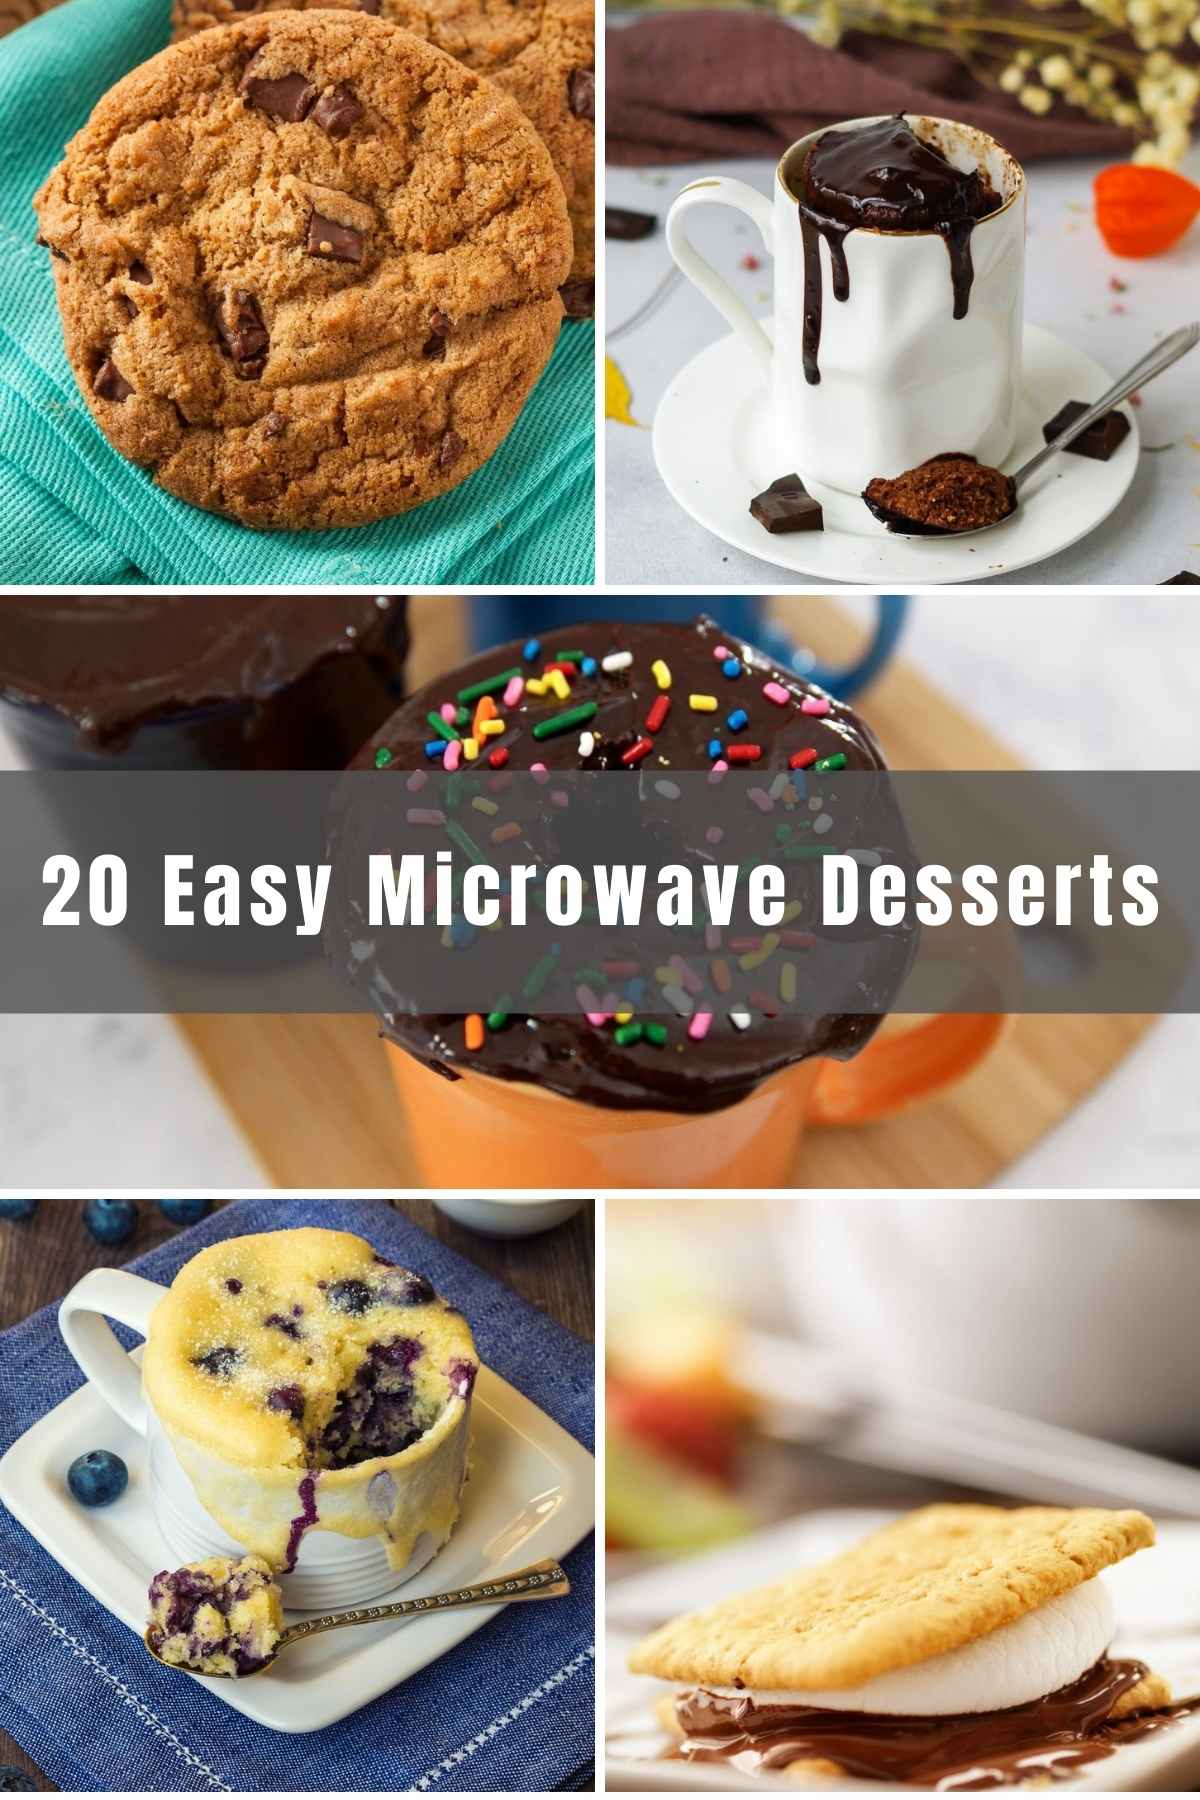 Microwaves are not just for reheating leftovers, they can also produce great-tasting desserts you’ll love! We’ve gathered 20 Easy Microwave Desserts to make in minutes. Most are single-servings, so go ahead and treat yourself!